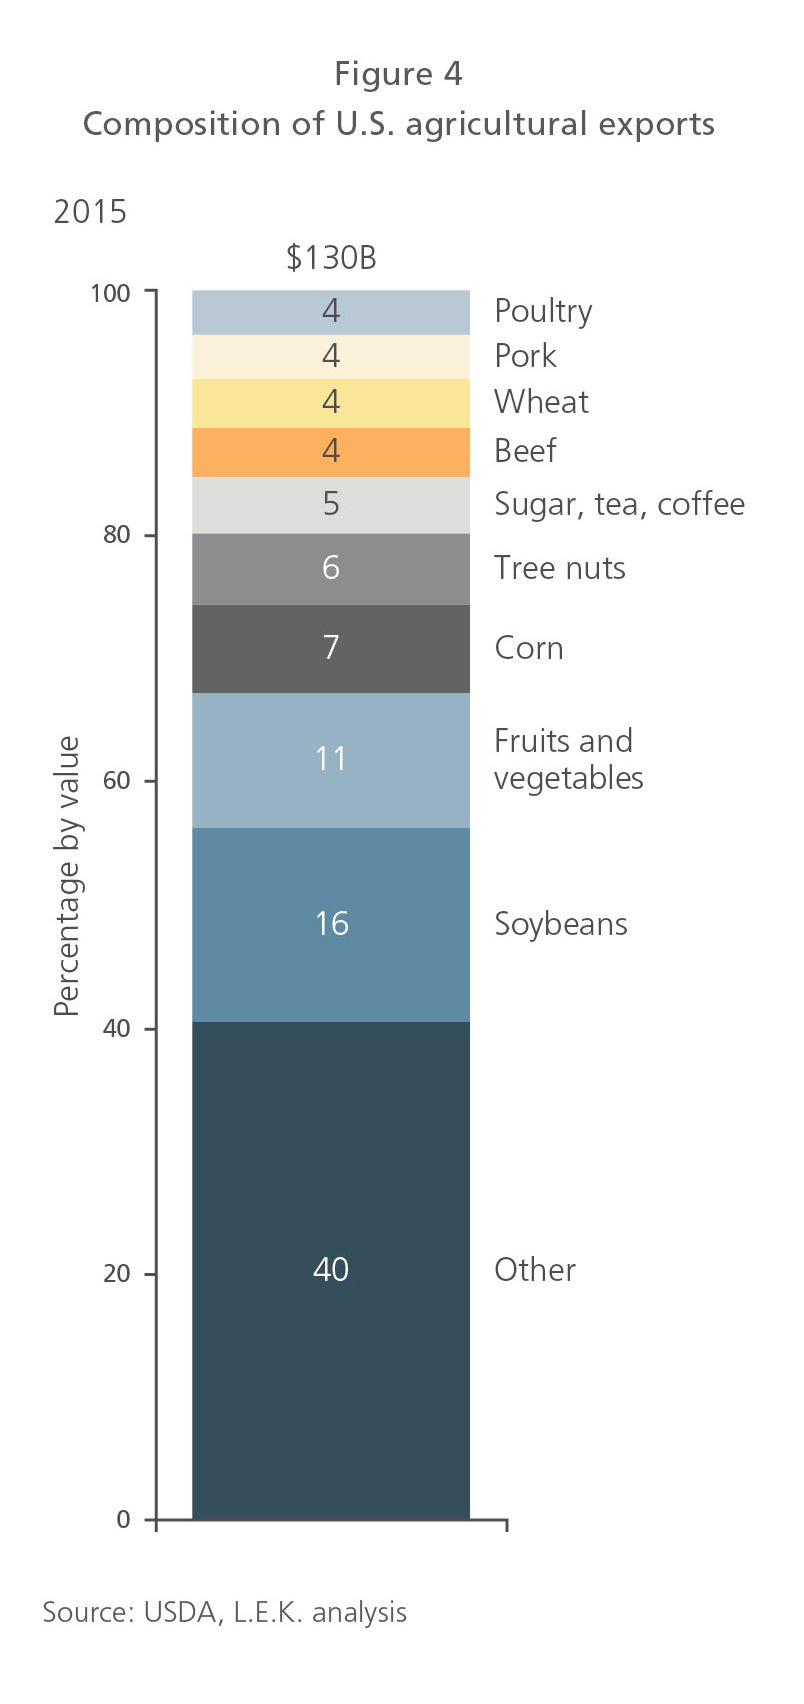 Composition of U.S. agricultural exports